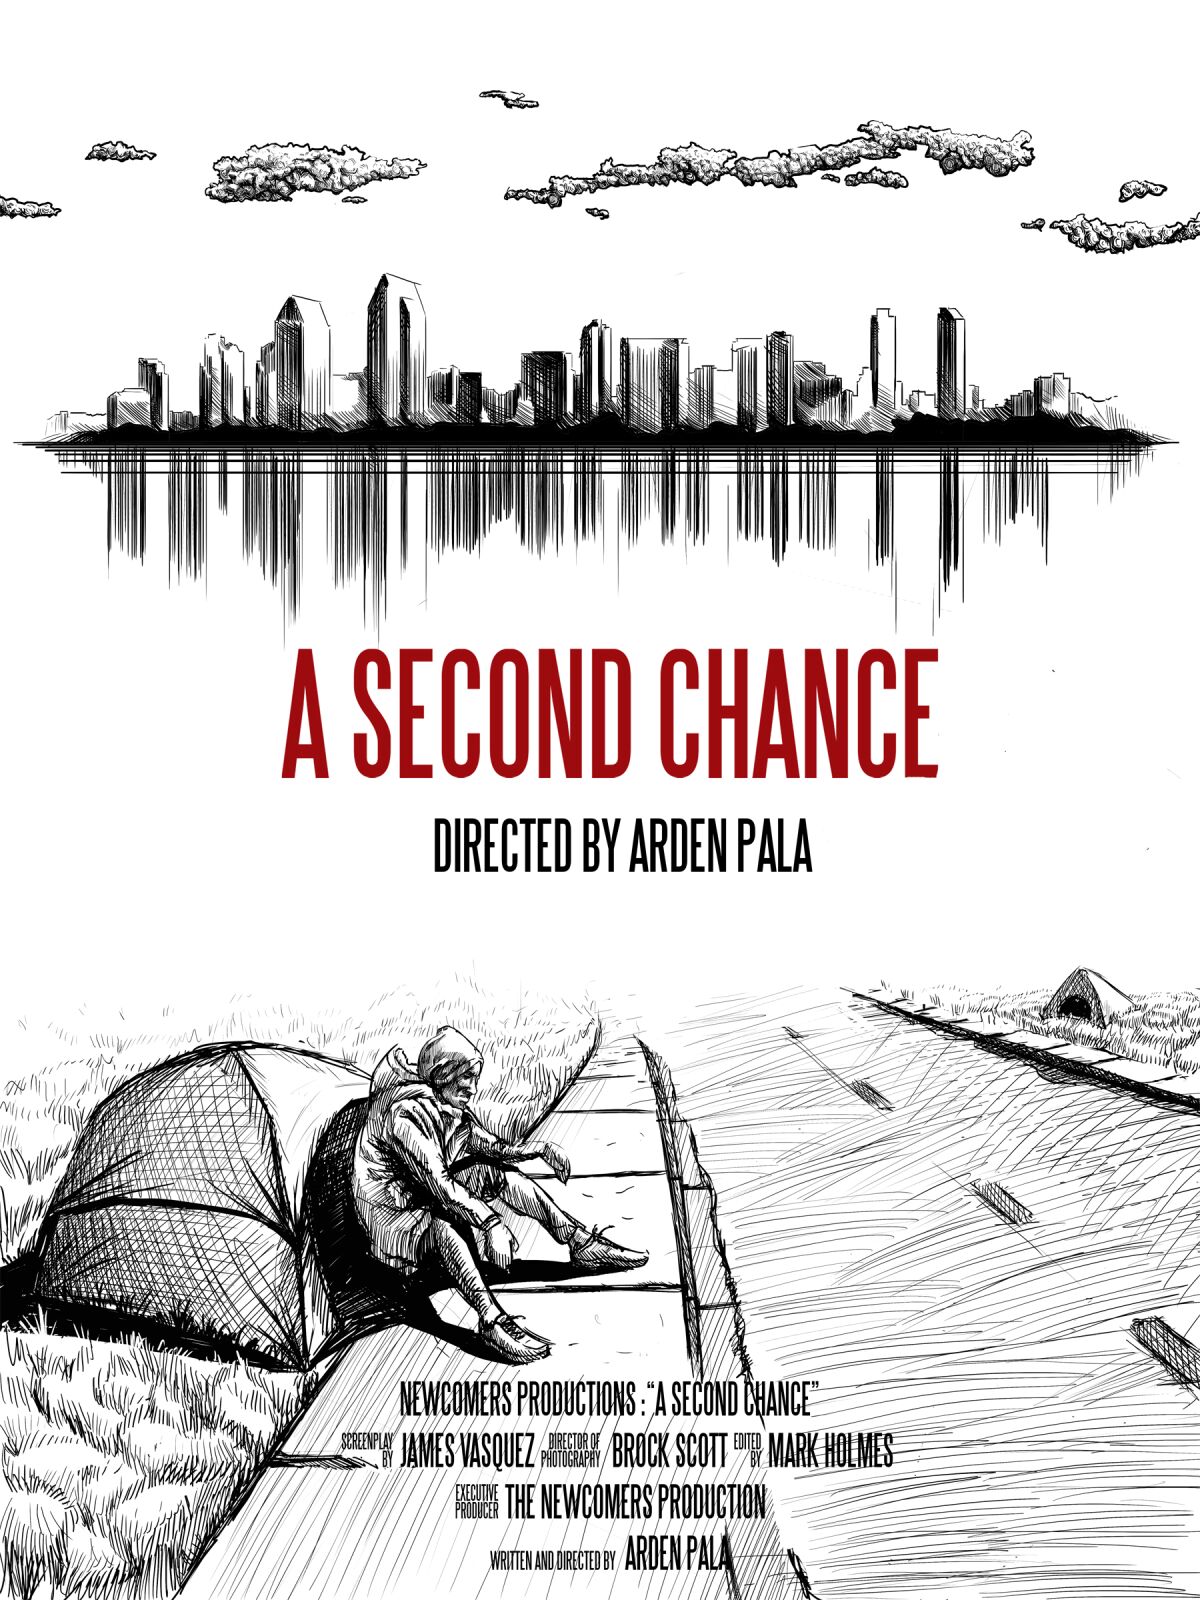 Poster for "A Second Chance" directed by Arden Pala.